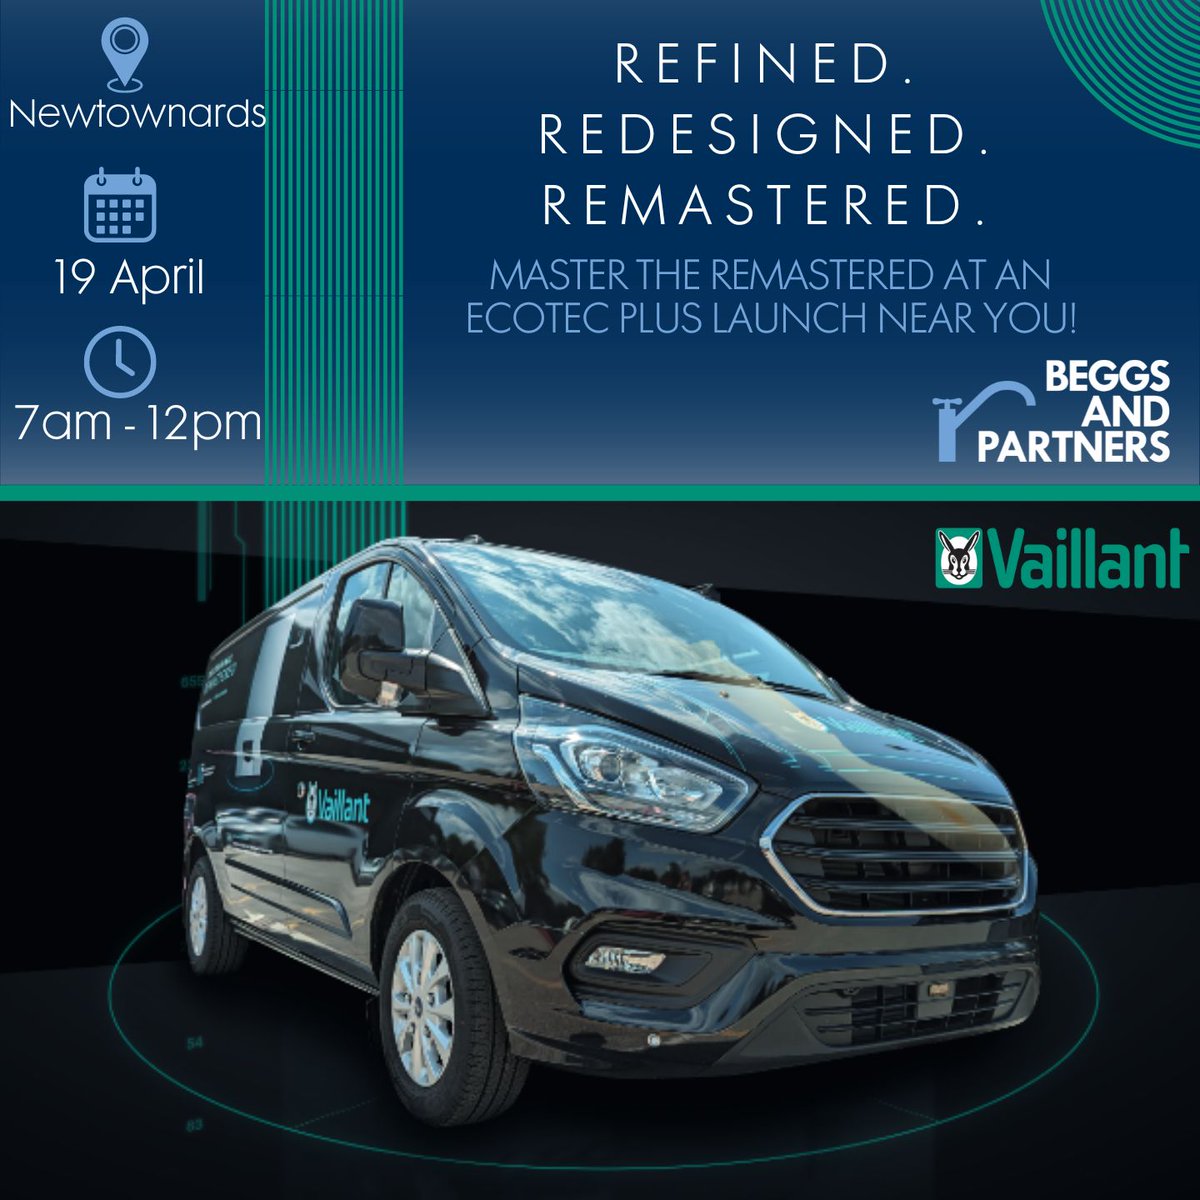 ✨REFINED.REDESIGNED.REMASTERED✨

Join us this Friday in our Newtownards branch!